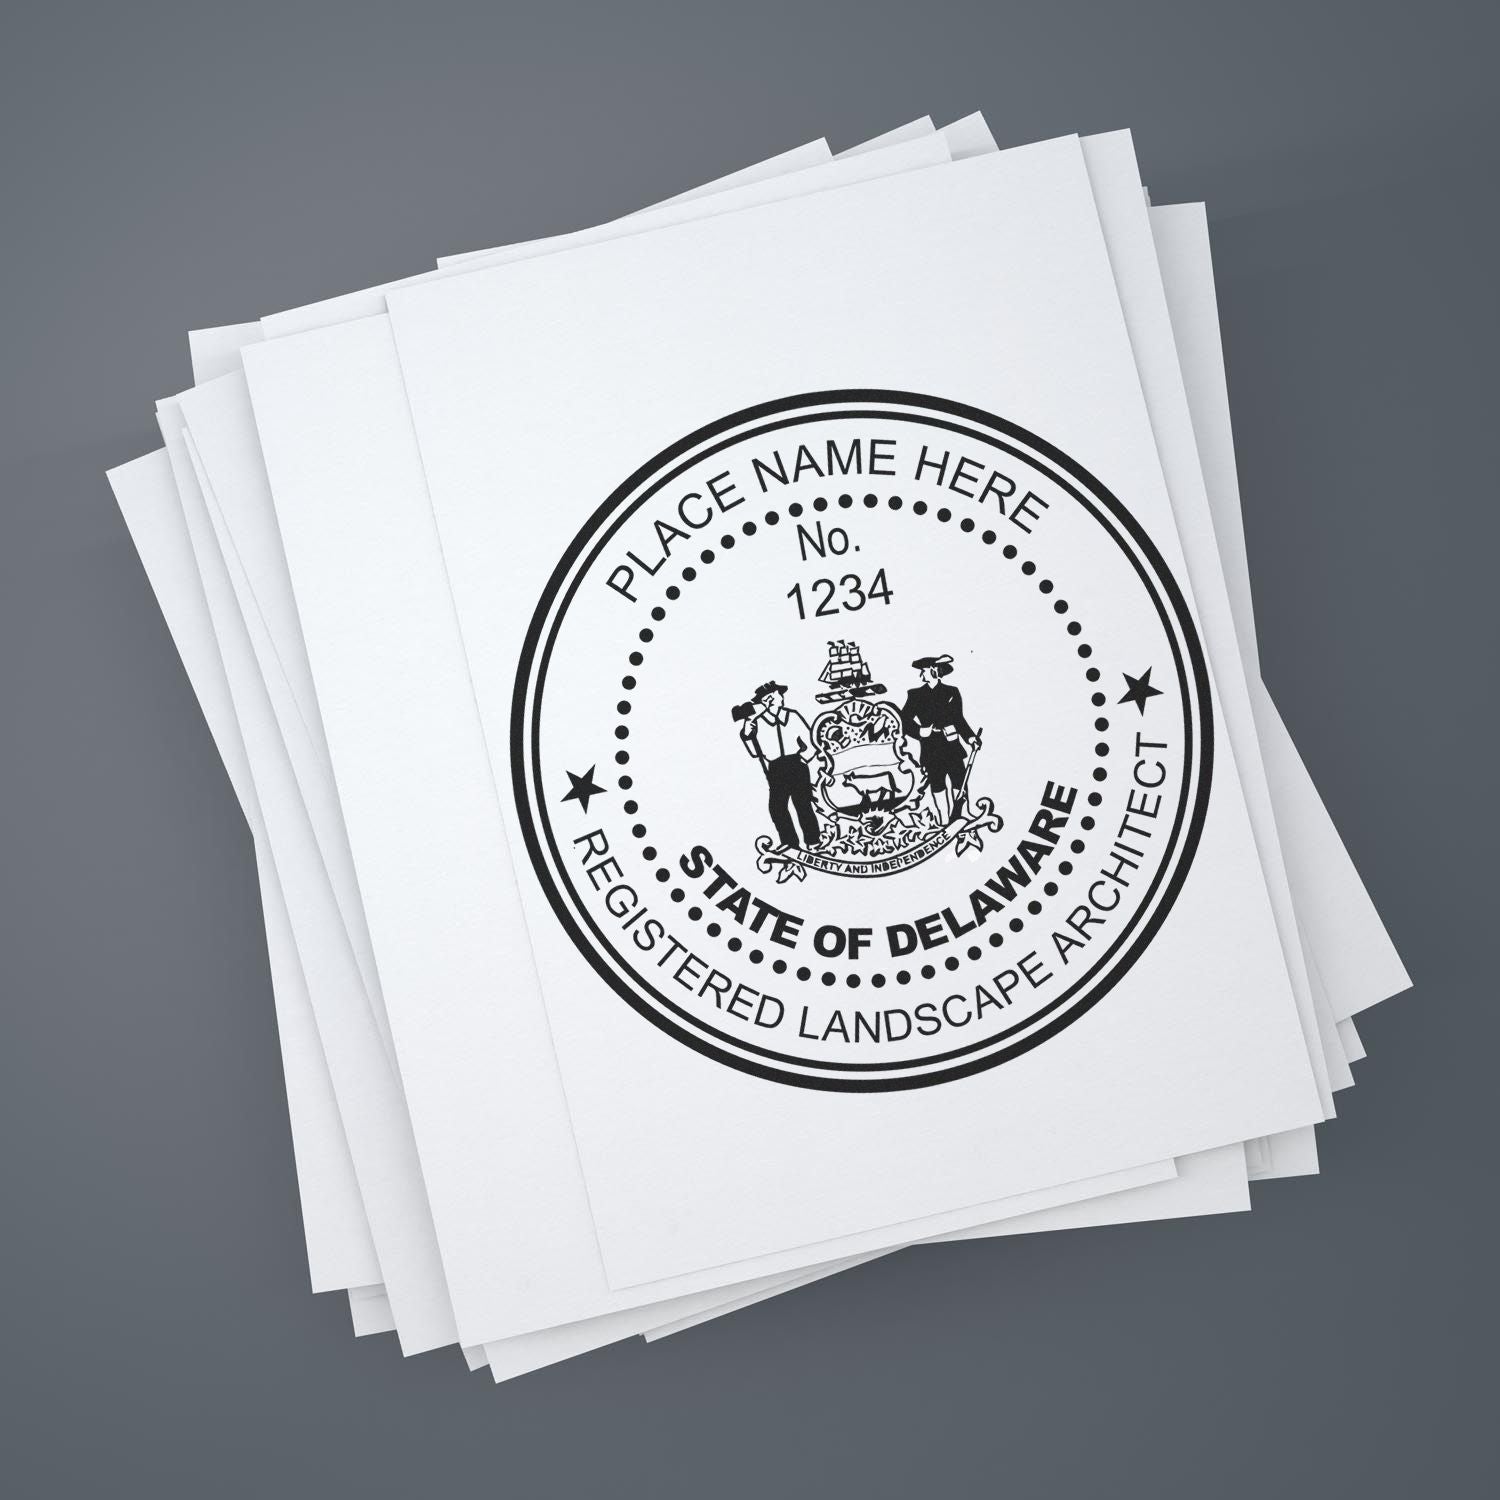 The main image for the Digital Delaware Landscape Architect Stamp depicting a sample of the imprint and electronic files